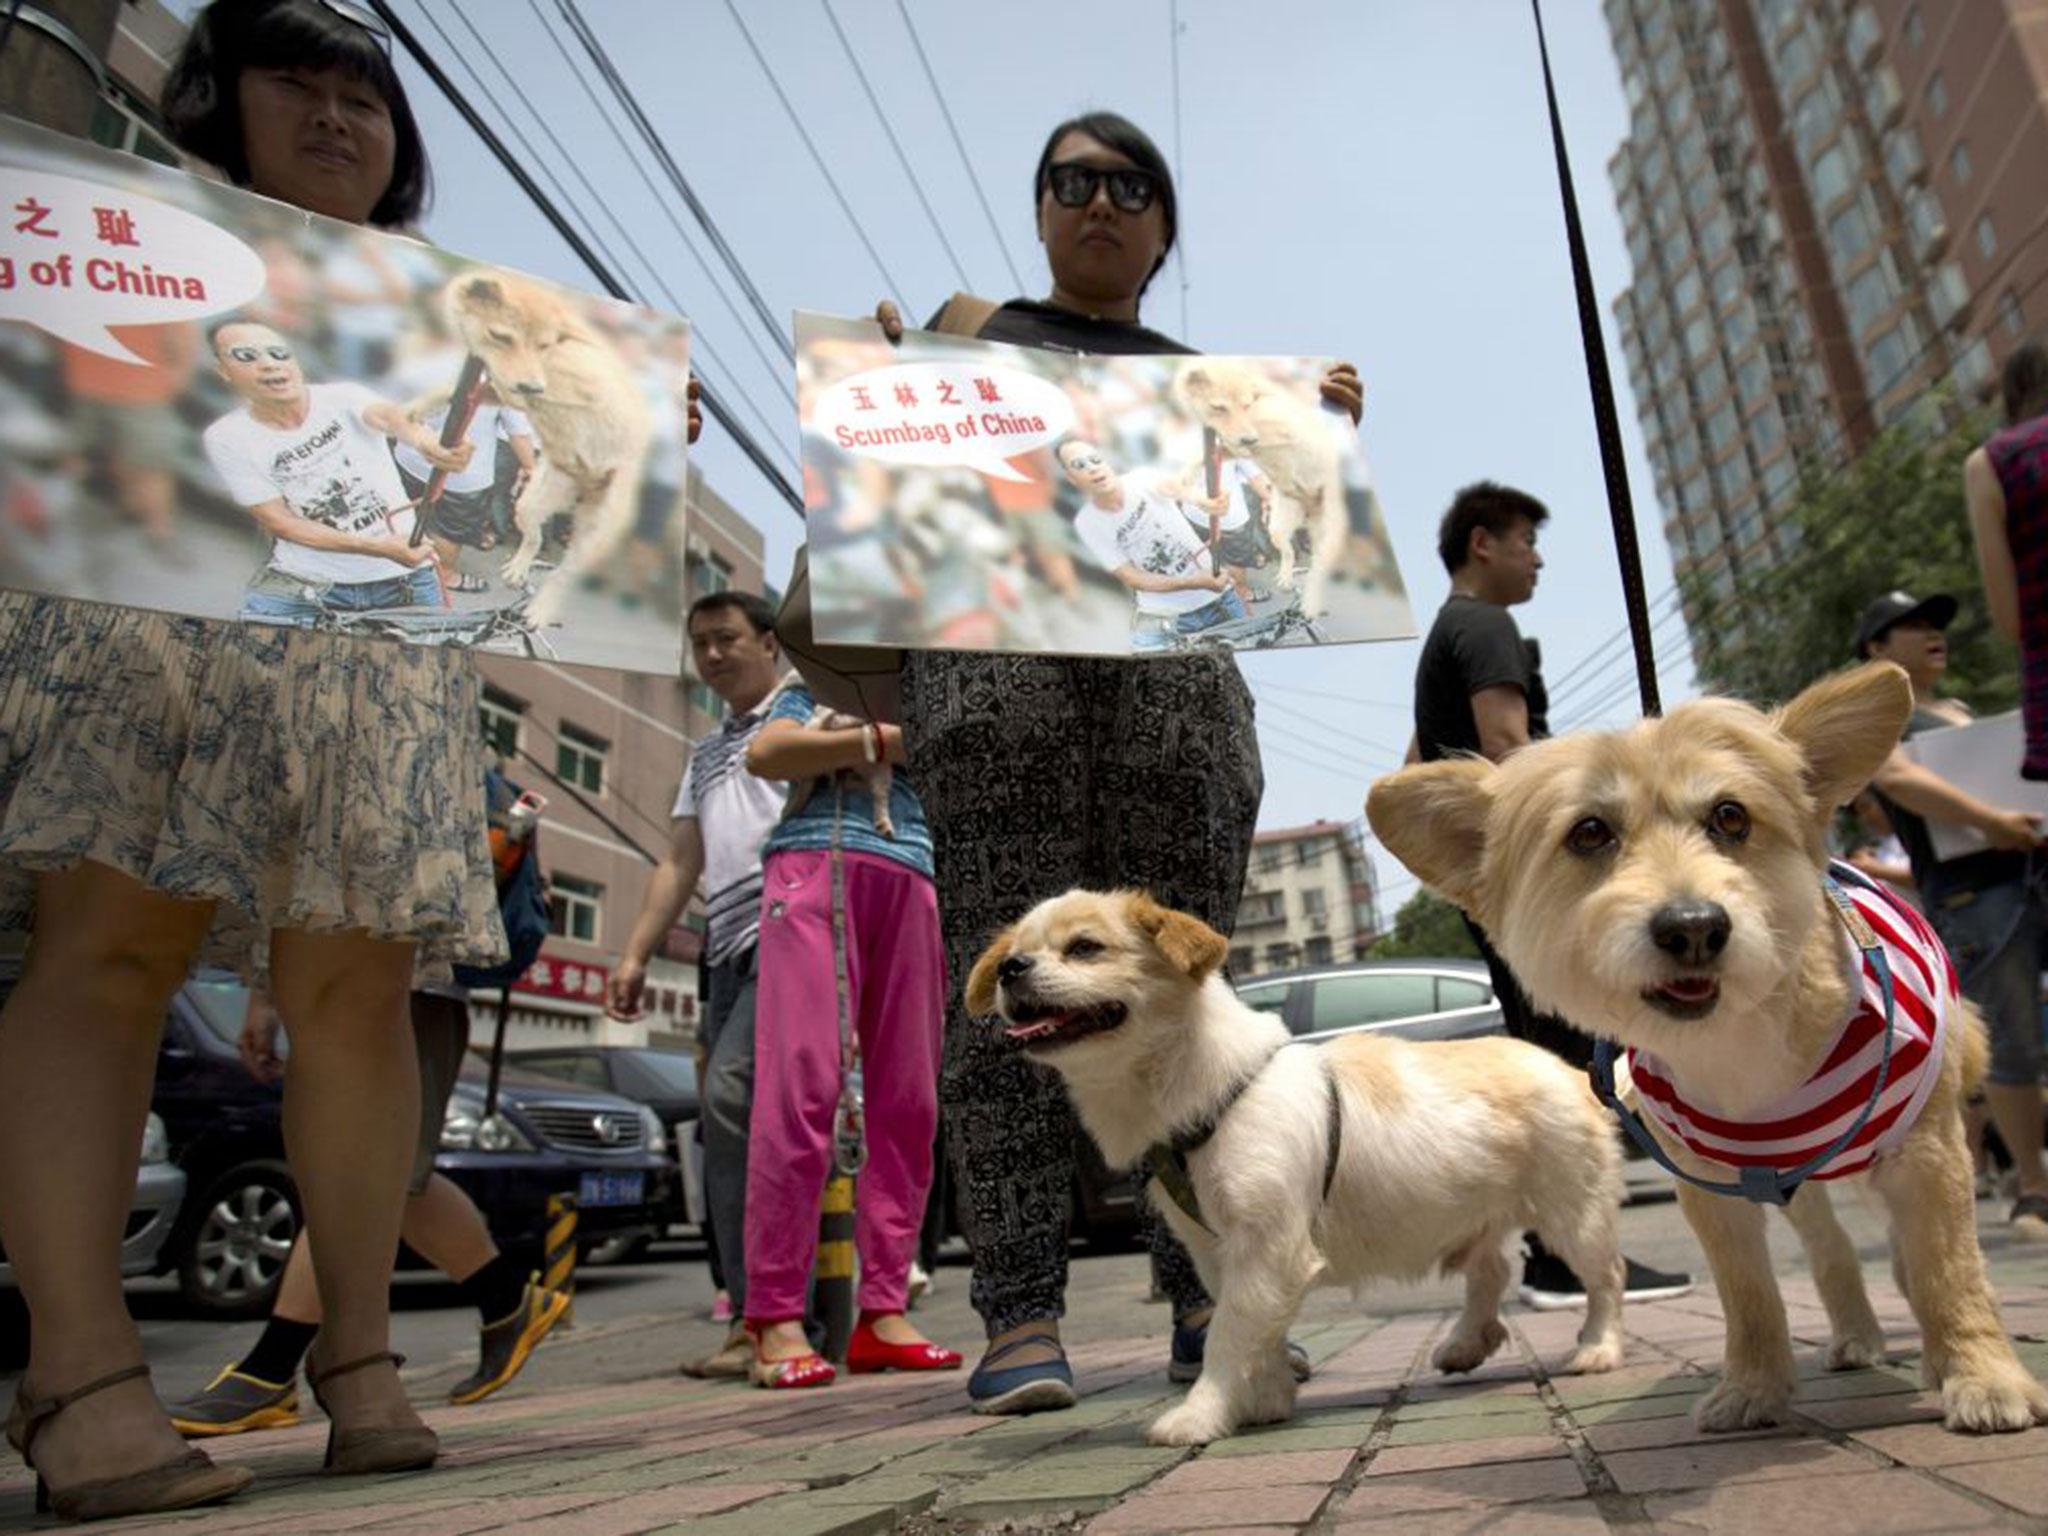 Animal rights advocates hold protest signs outside the Yulin government office in Beijing, as the petition is handed in